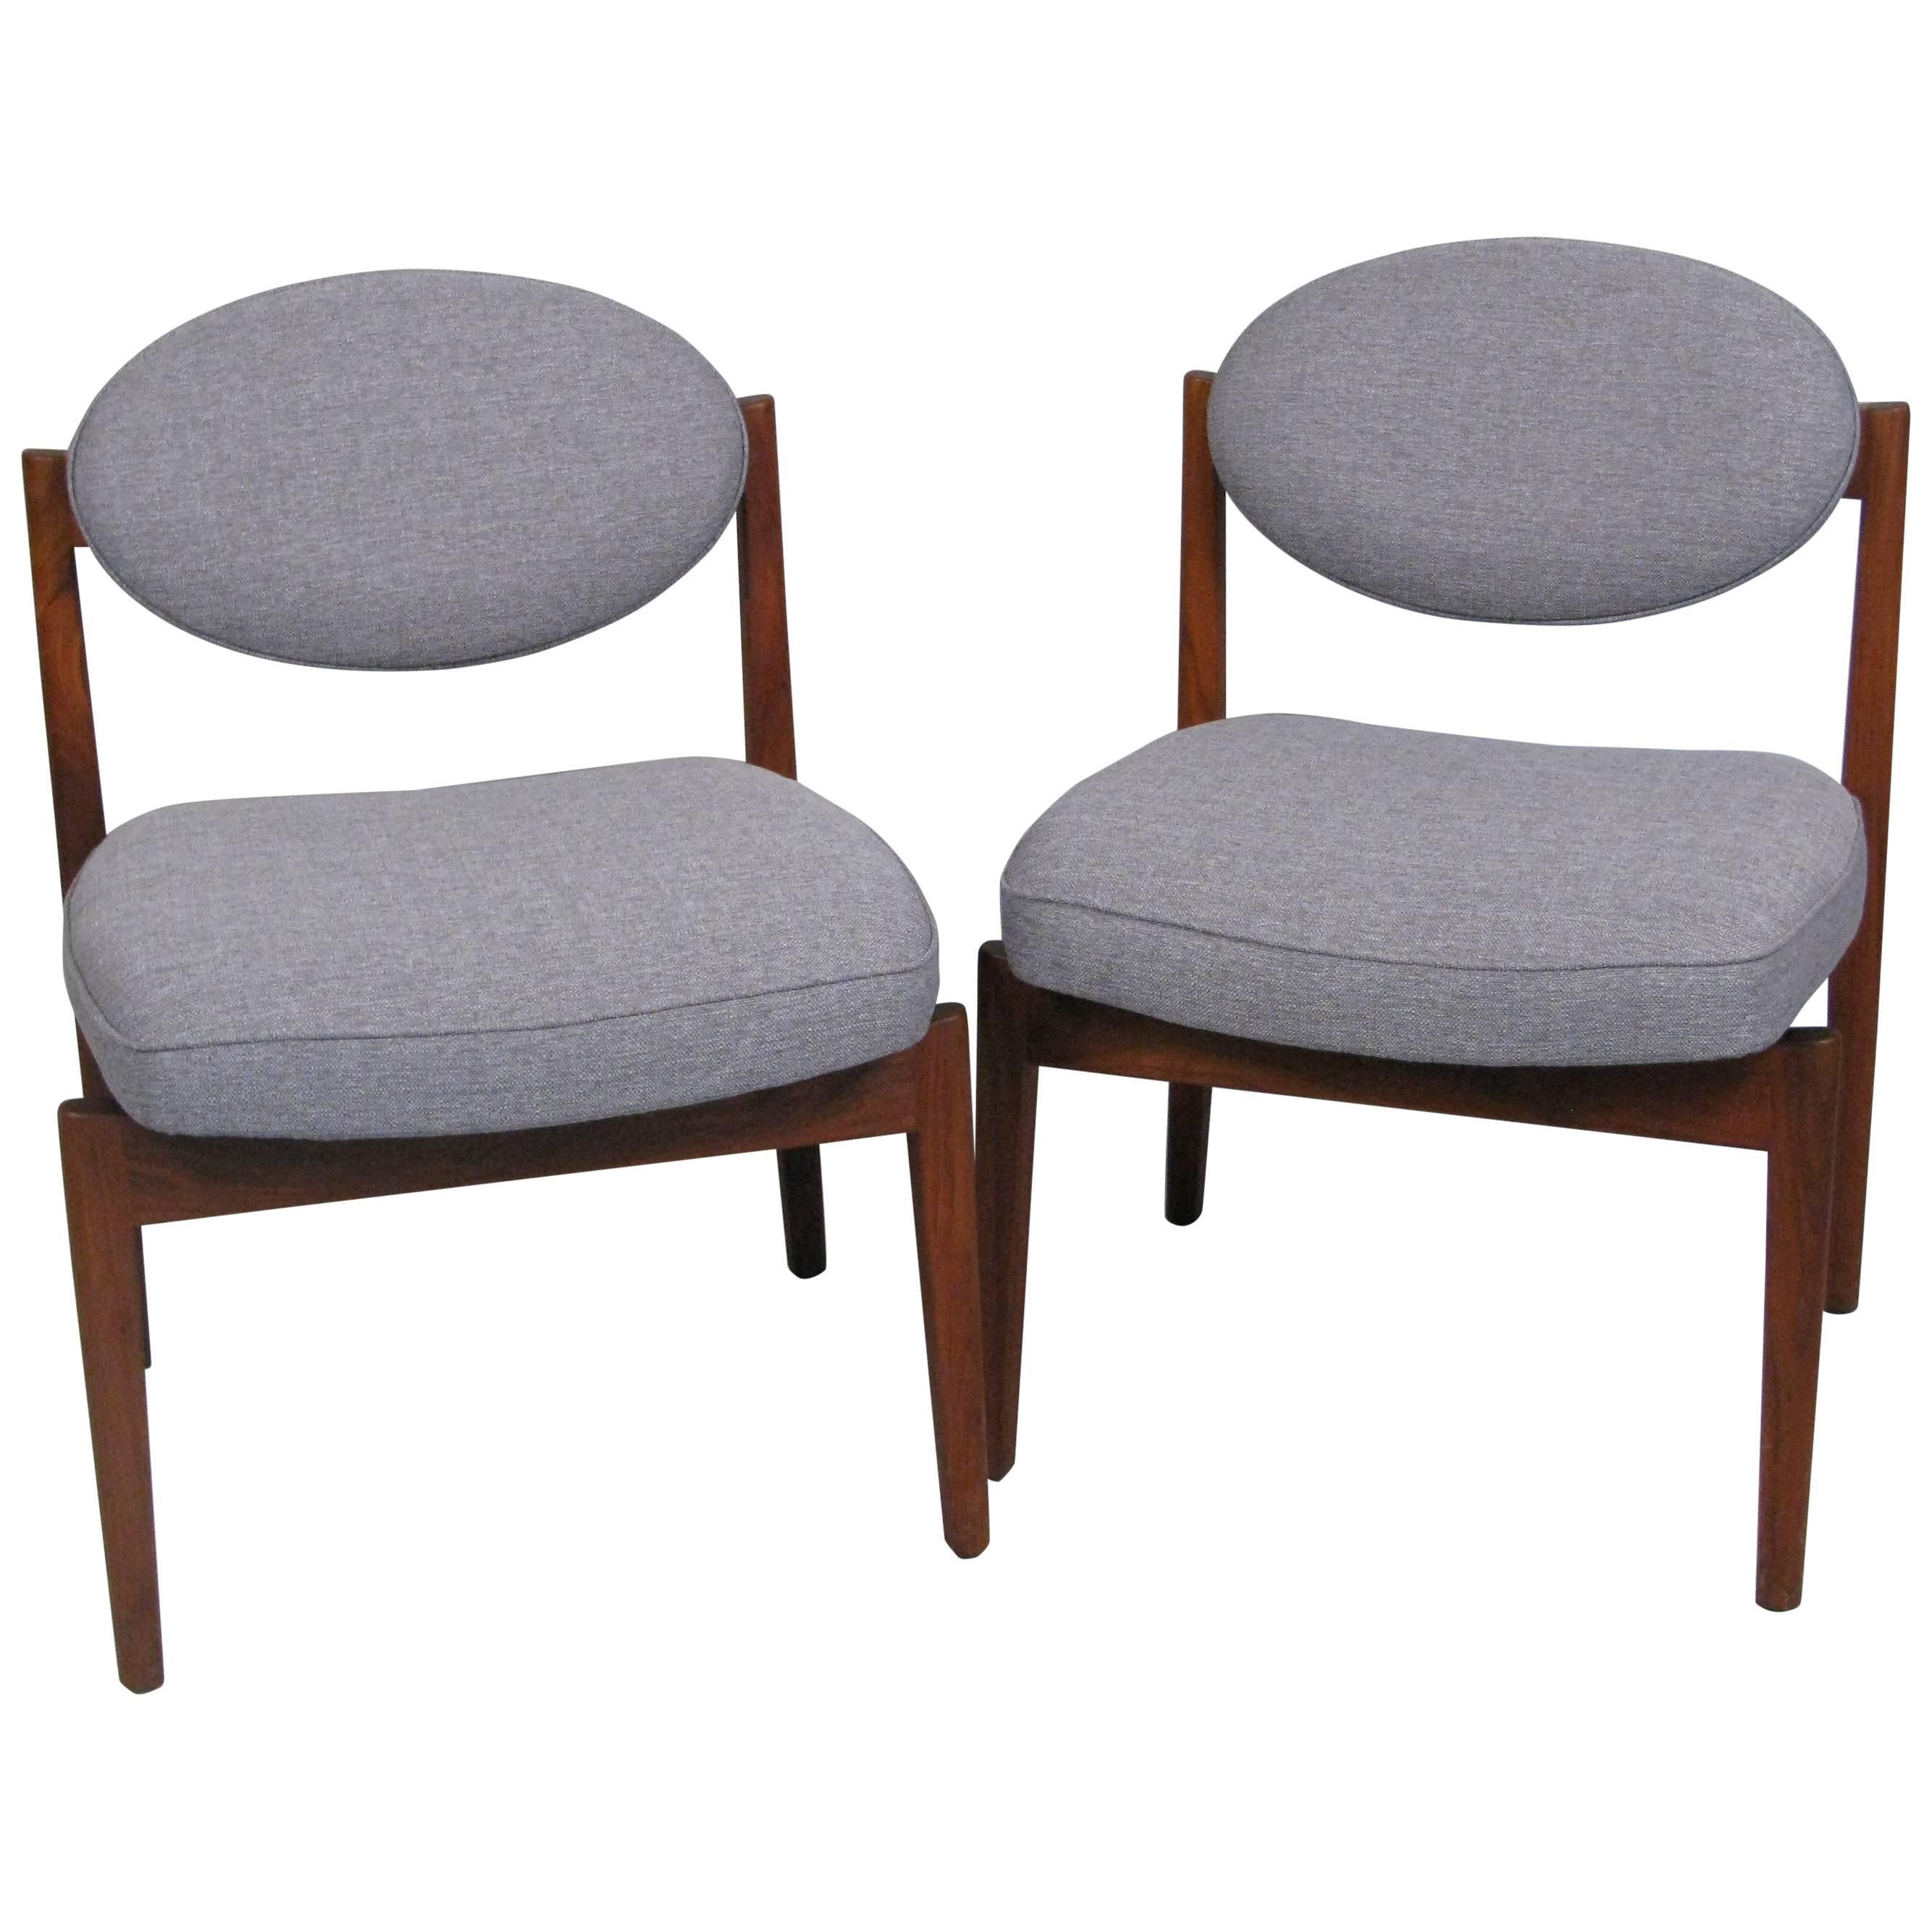 Pair of Midcentury Teak Armless Upholstered Chairs by Jens Risom For Sale